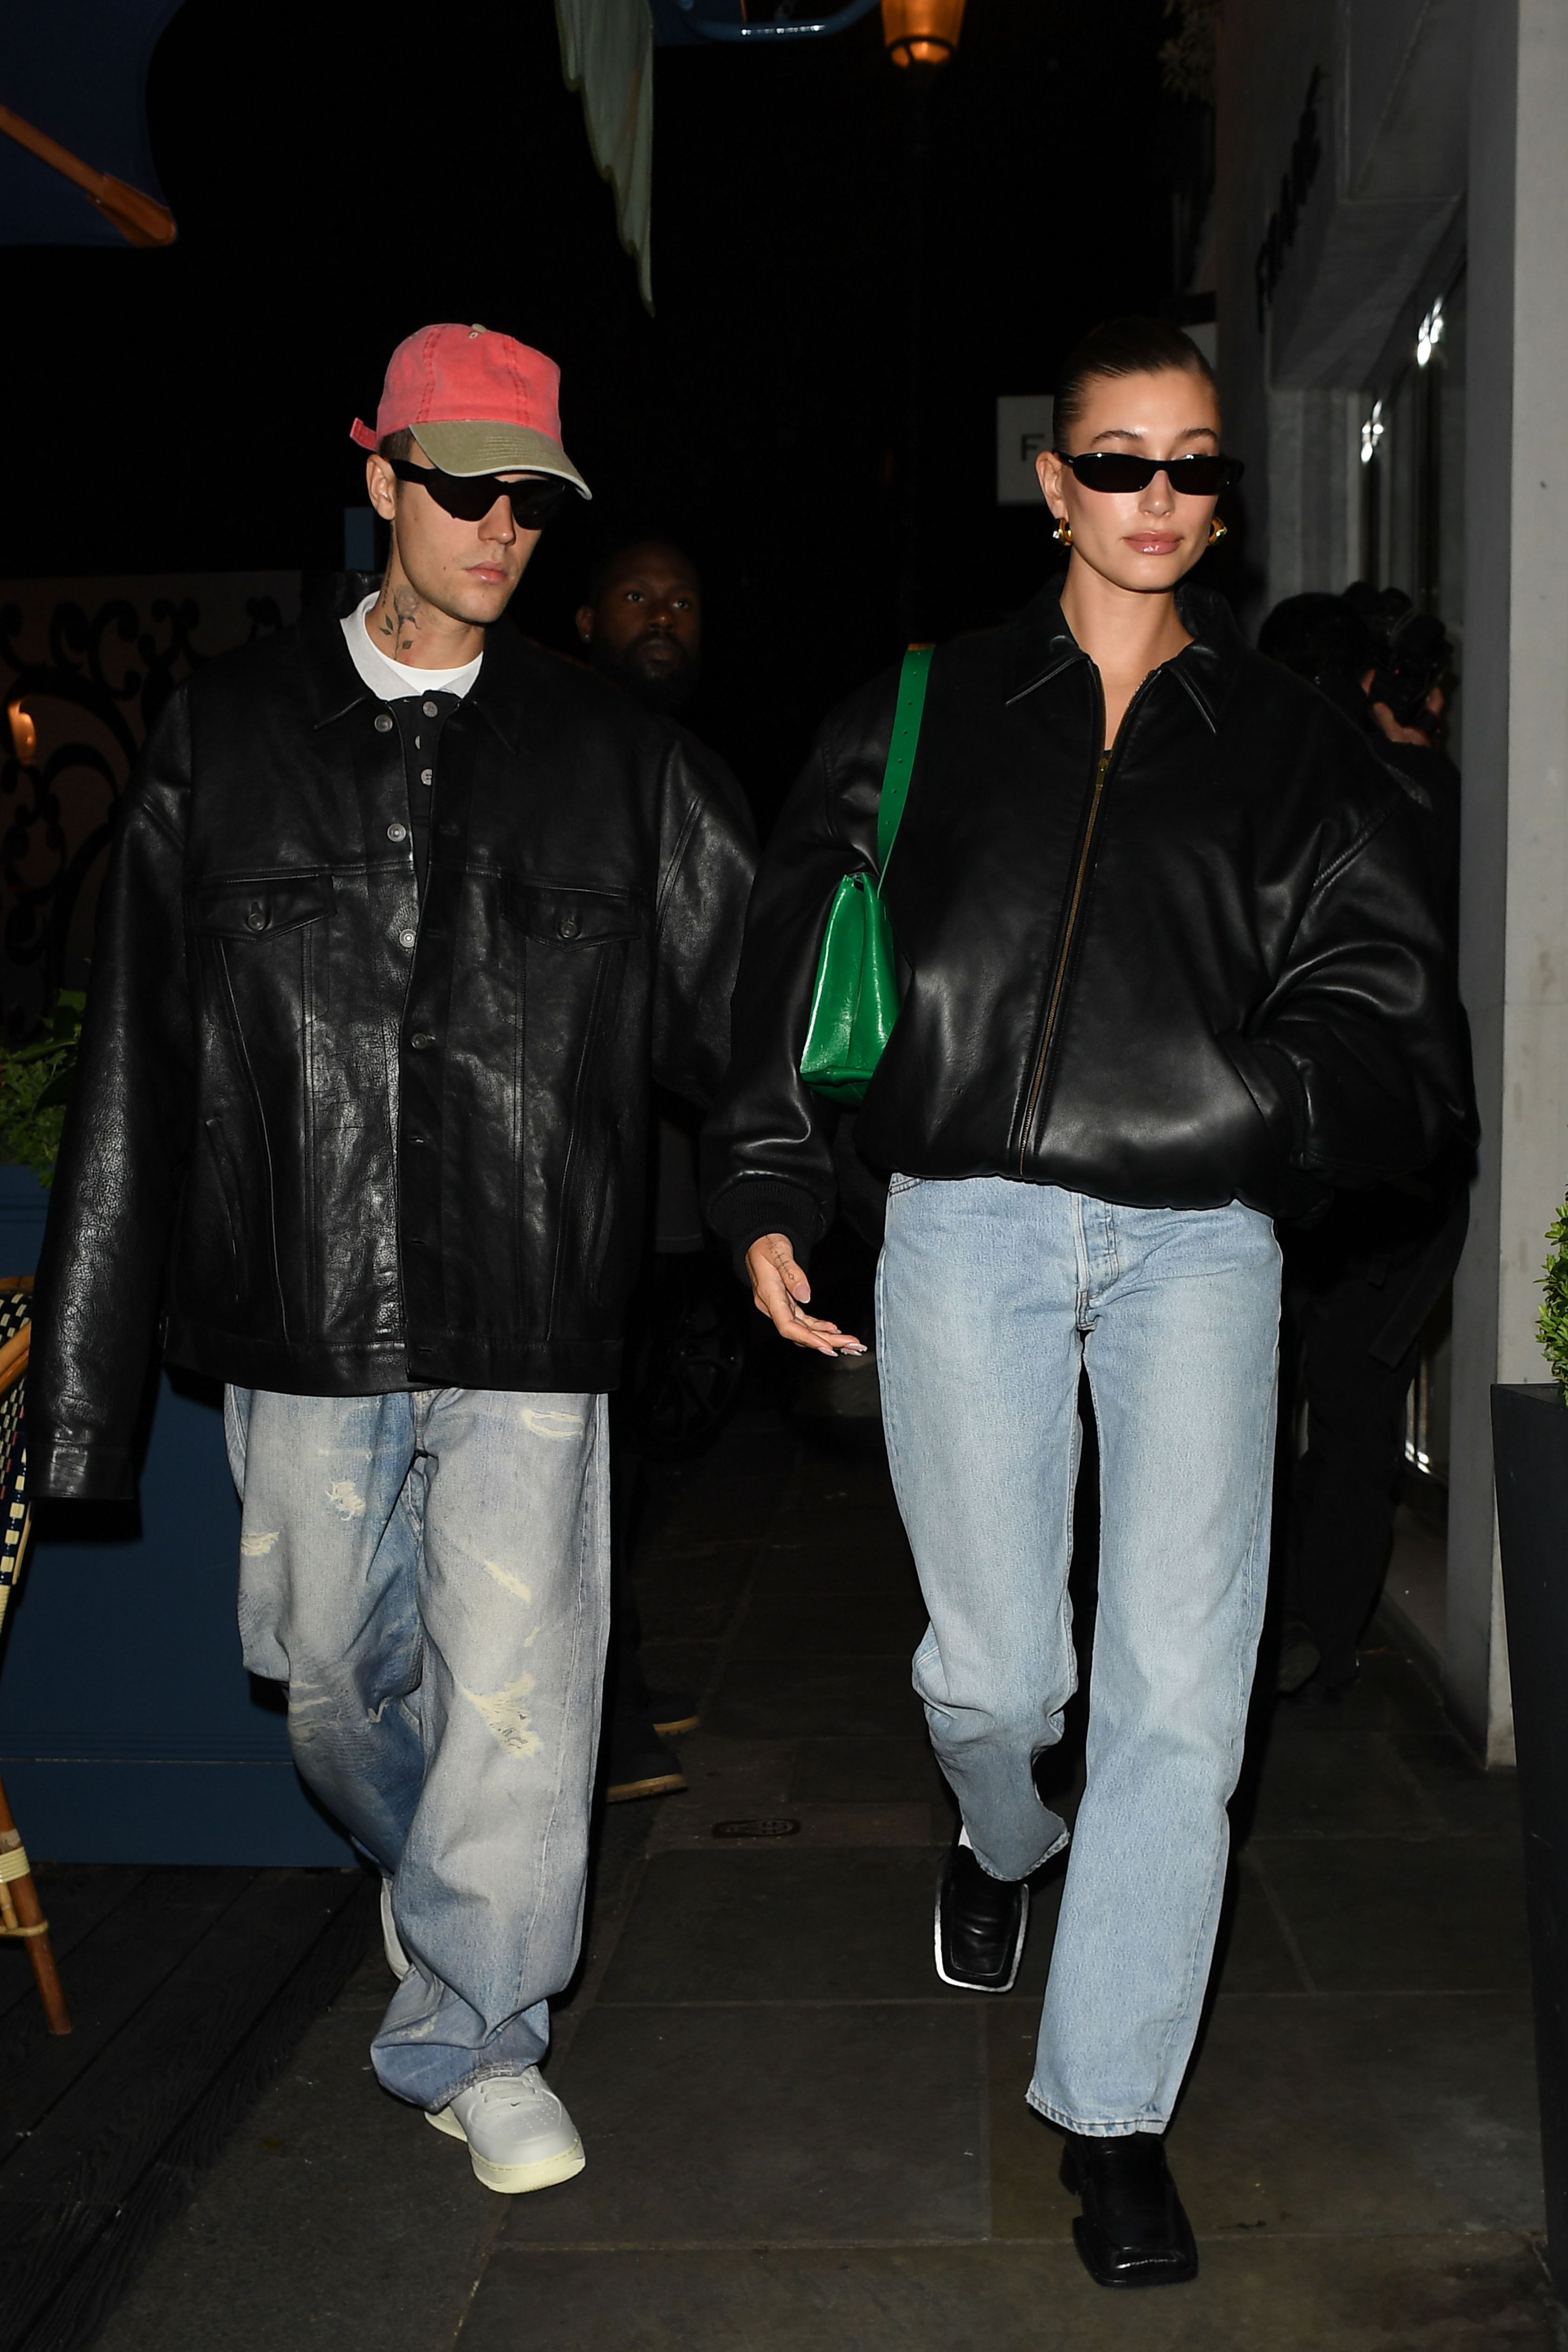 london, united kingdom may 16 hailey bieber and justin bieber is seen at daphnes restaurant on may 16, 2023 in london, united kingdom photo by megagc images